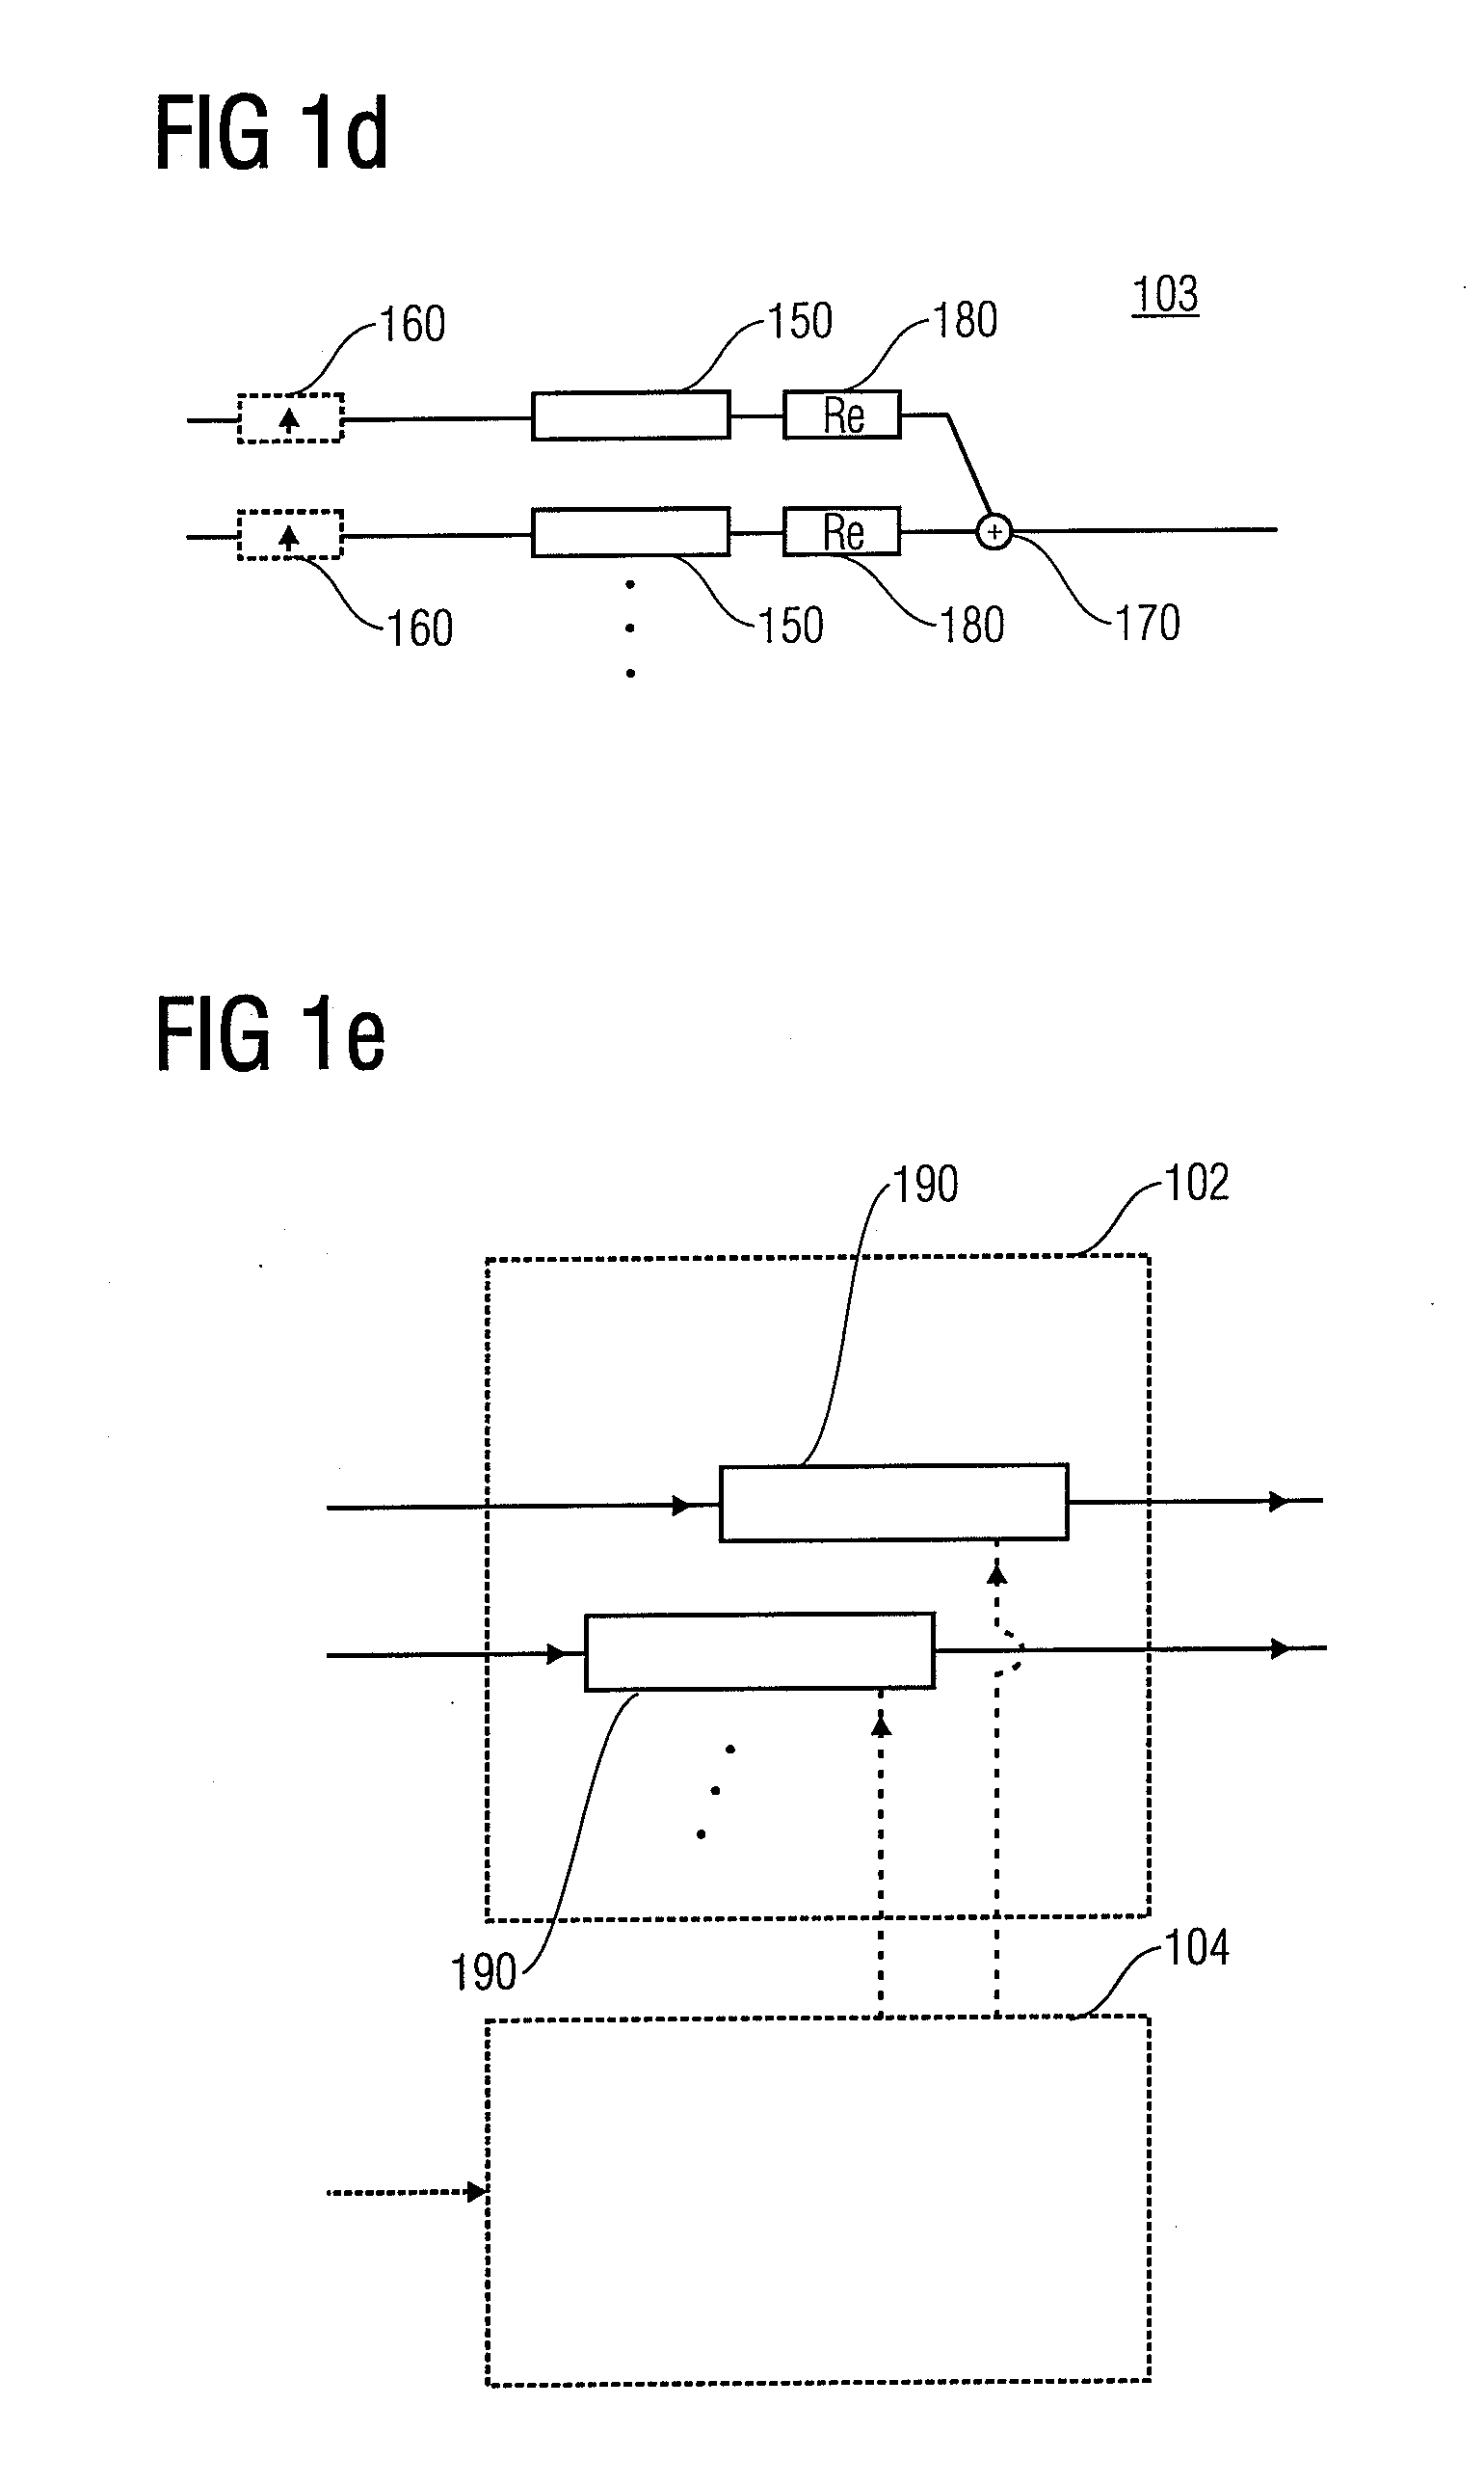 Efficient filtering with a complex modulated filterbank